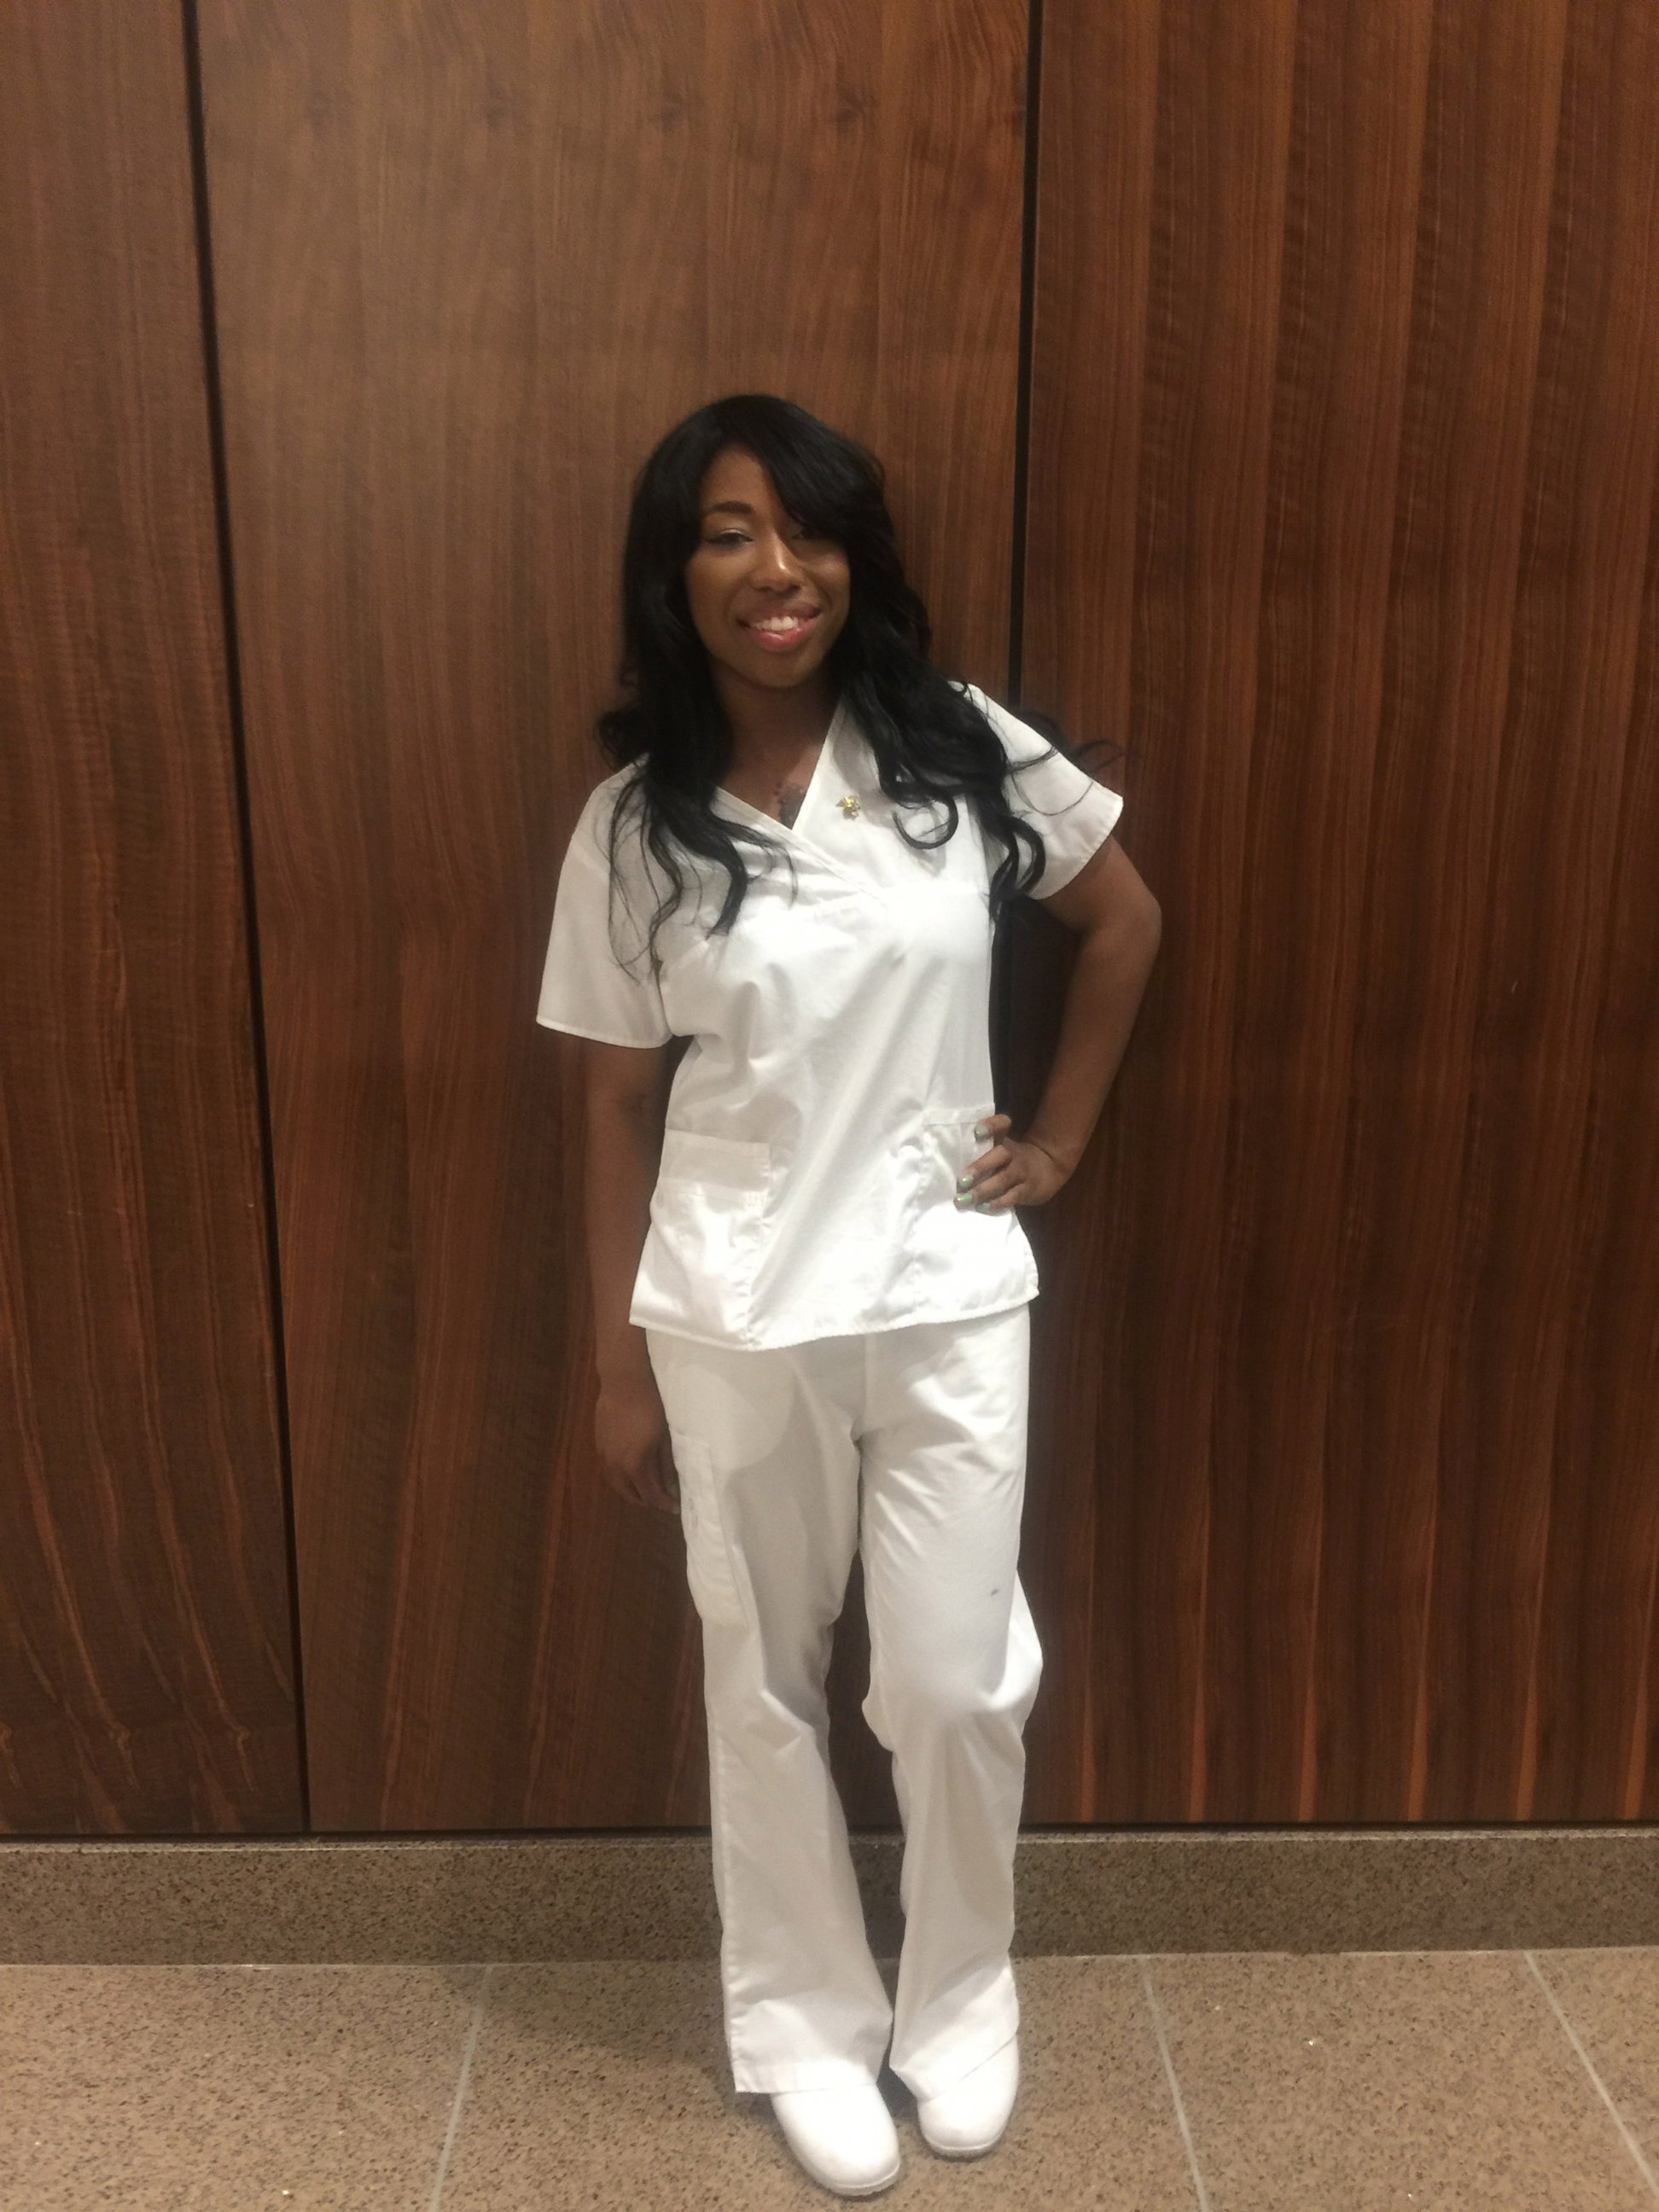 Linette Iloh is graduating with a degree in nursing from Bowie State University on May 23, 2017. She was inspired to become a nurse after having open heart surgery 10 years ago.